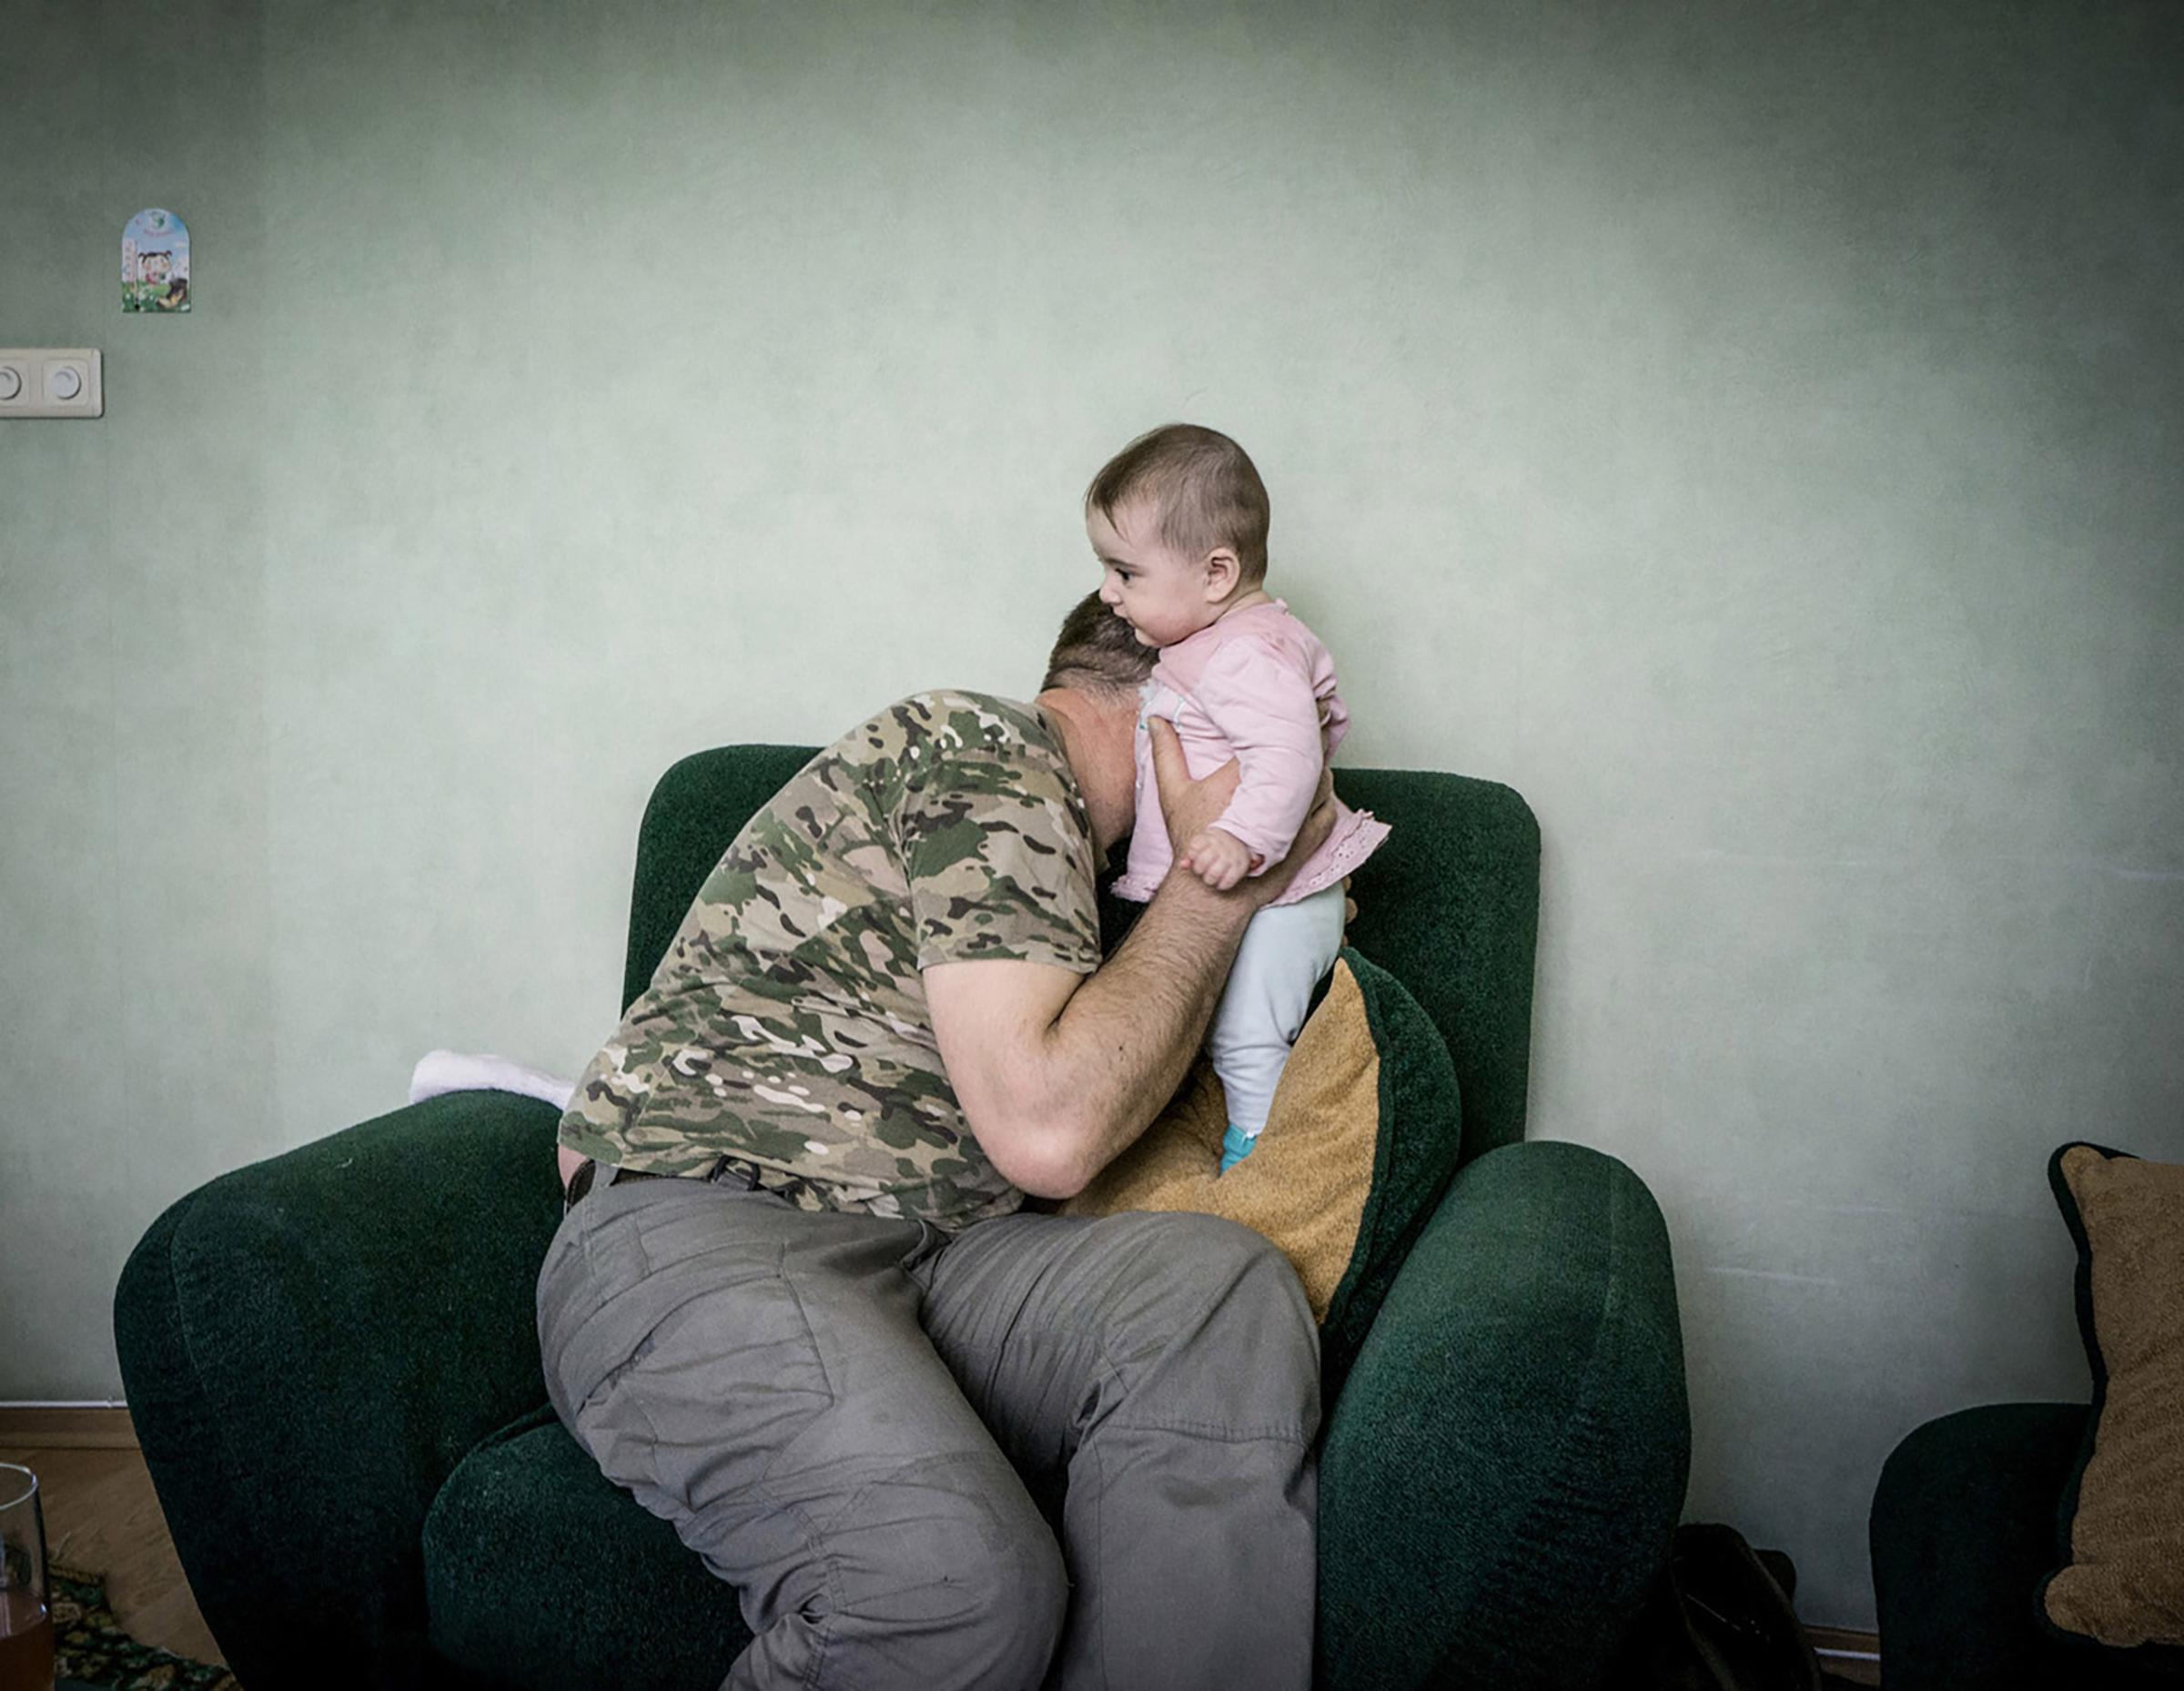 David Ebralidze with his daughter .Julia Tarasova moved to Ukraine 15 years ago from Murmansk, Russia. She supported both the Orange and Maidan Revolutions and became David’s partner in 2013. David volunteered to fight separatists in 2014 and was granted Ukrainian citizenship as a result. David and Julia are two protagonists from my project that I have been following for two years.From an interview with Julia:“I never thought I would bid farewell to man going to war. Before, we watched Soviet movies about World War II, where women in headscarfs bid farewell to their men. We watched them as kids, thinking they were part of history that would never repeat. I have bid farewell to David three or four times more… The first time it is hard, then you get used to it. But still each time is like the last time (…) When he was a freed from prisoner of war, I met him on the road from Donetsk to Dniepropetrovsk. The whole way I imagined how I would greet him, jump on him and embrace him…but when he came, it was a different person that met me. Outside it was him, but inside it was a stranger… The body cannot deceive you, I couldn’t pretend, I wasn’t able to compose myself. I was happy he was alive but a different person was standing in front of me.”